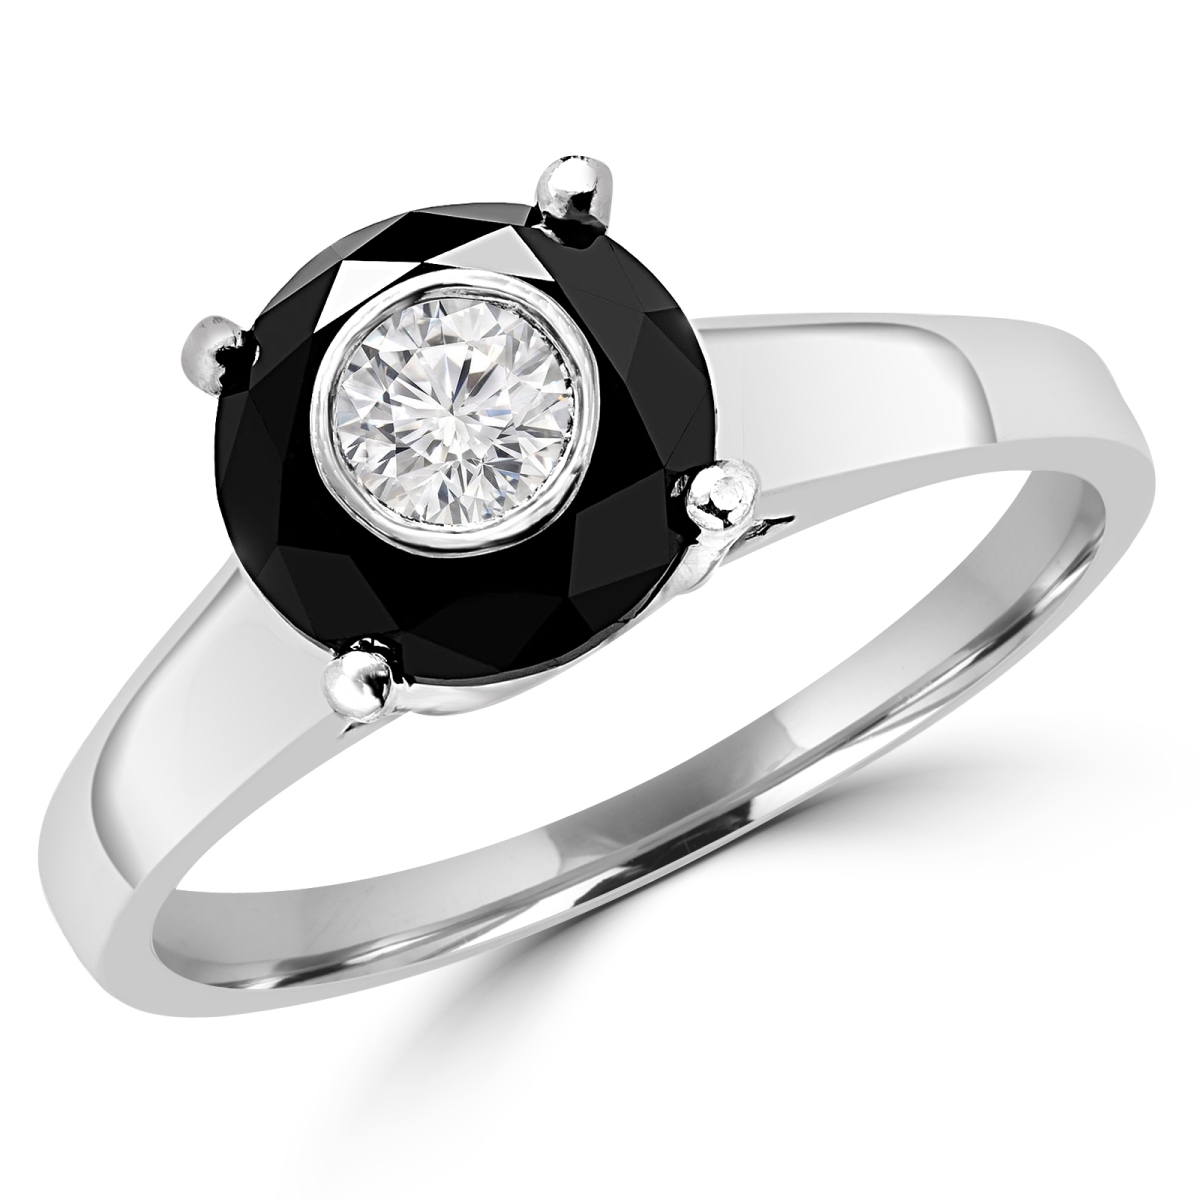 MD180615-3 0.9 CTW Round Black Diamond Simion Set Solitaire with Accents Engagement Ring in 14K White Gold - Size 3 -  Majesty Diamonds